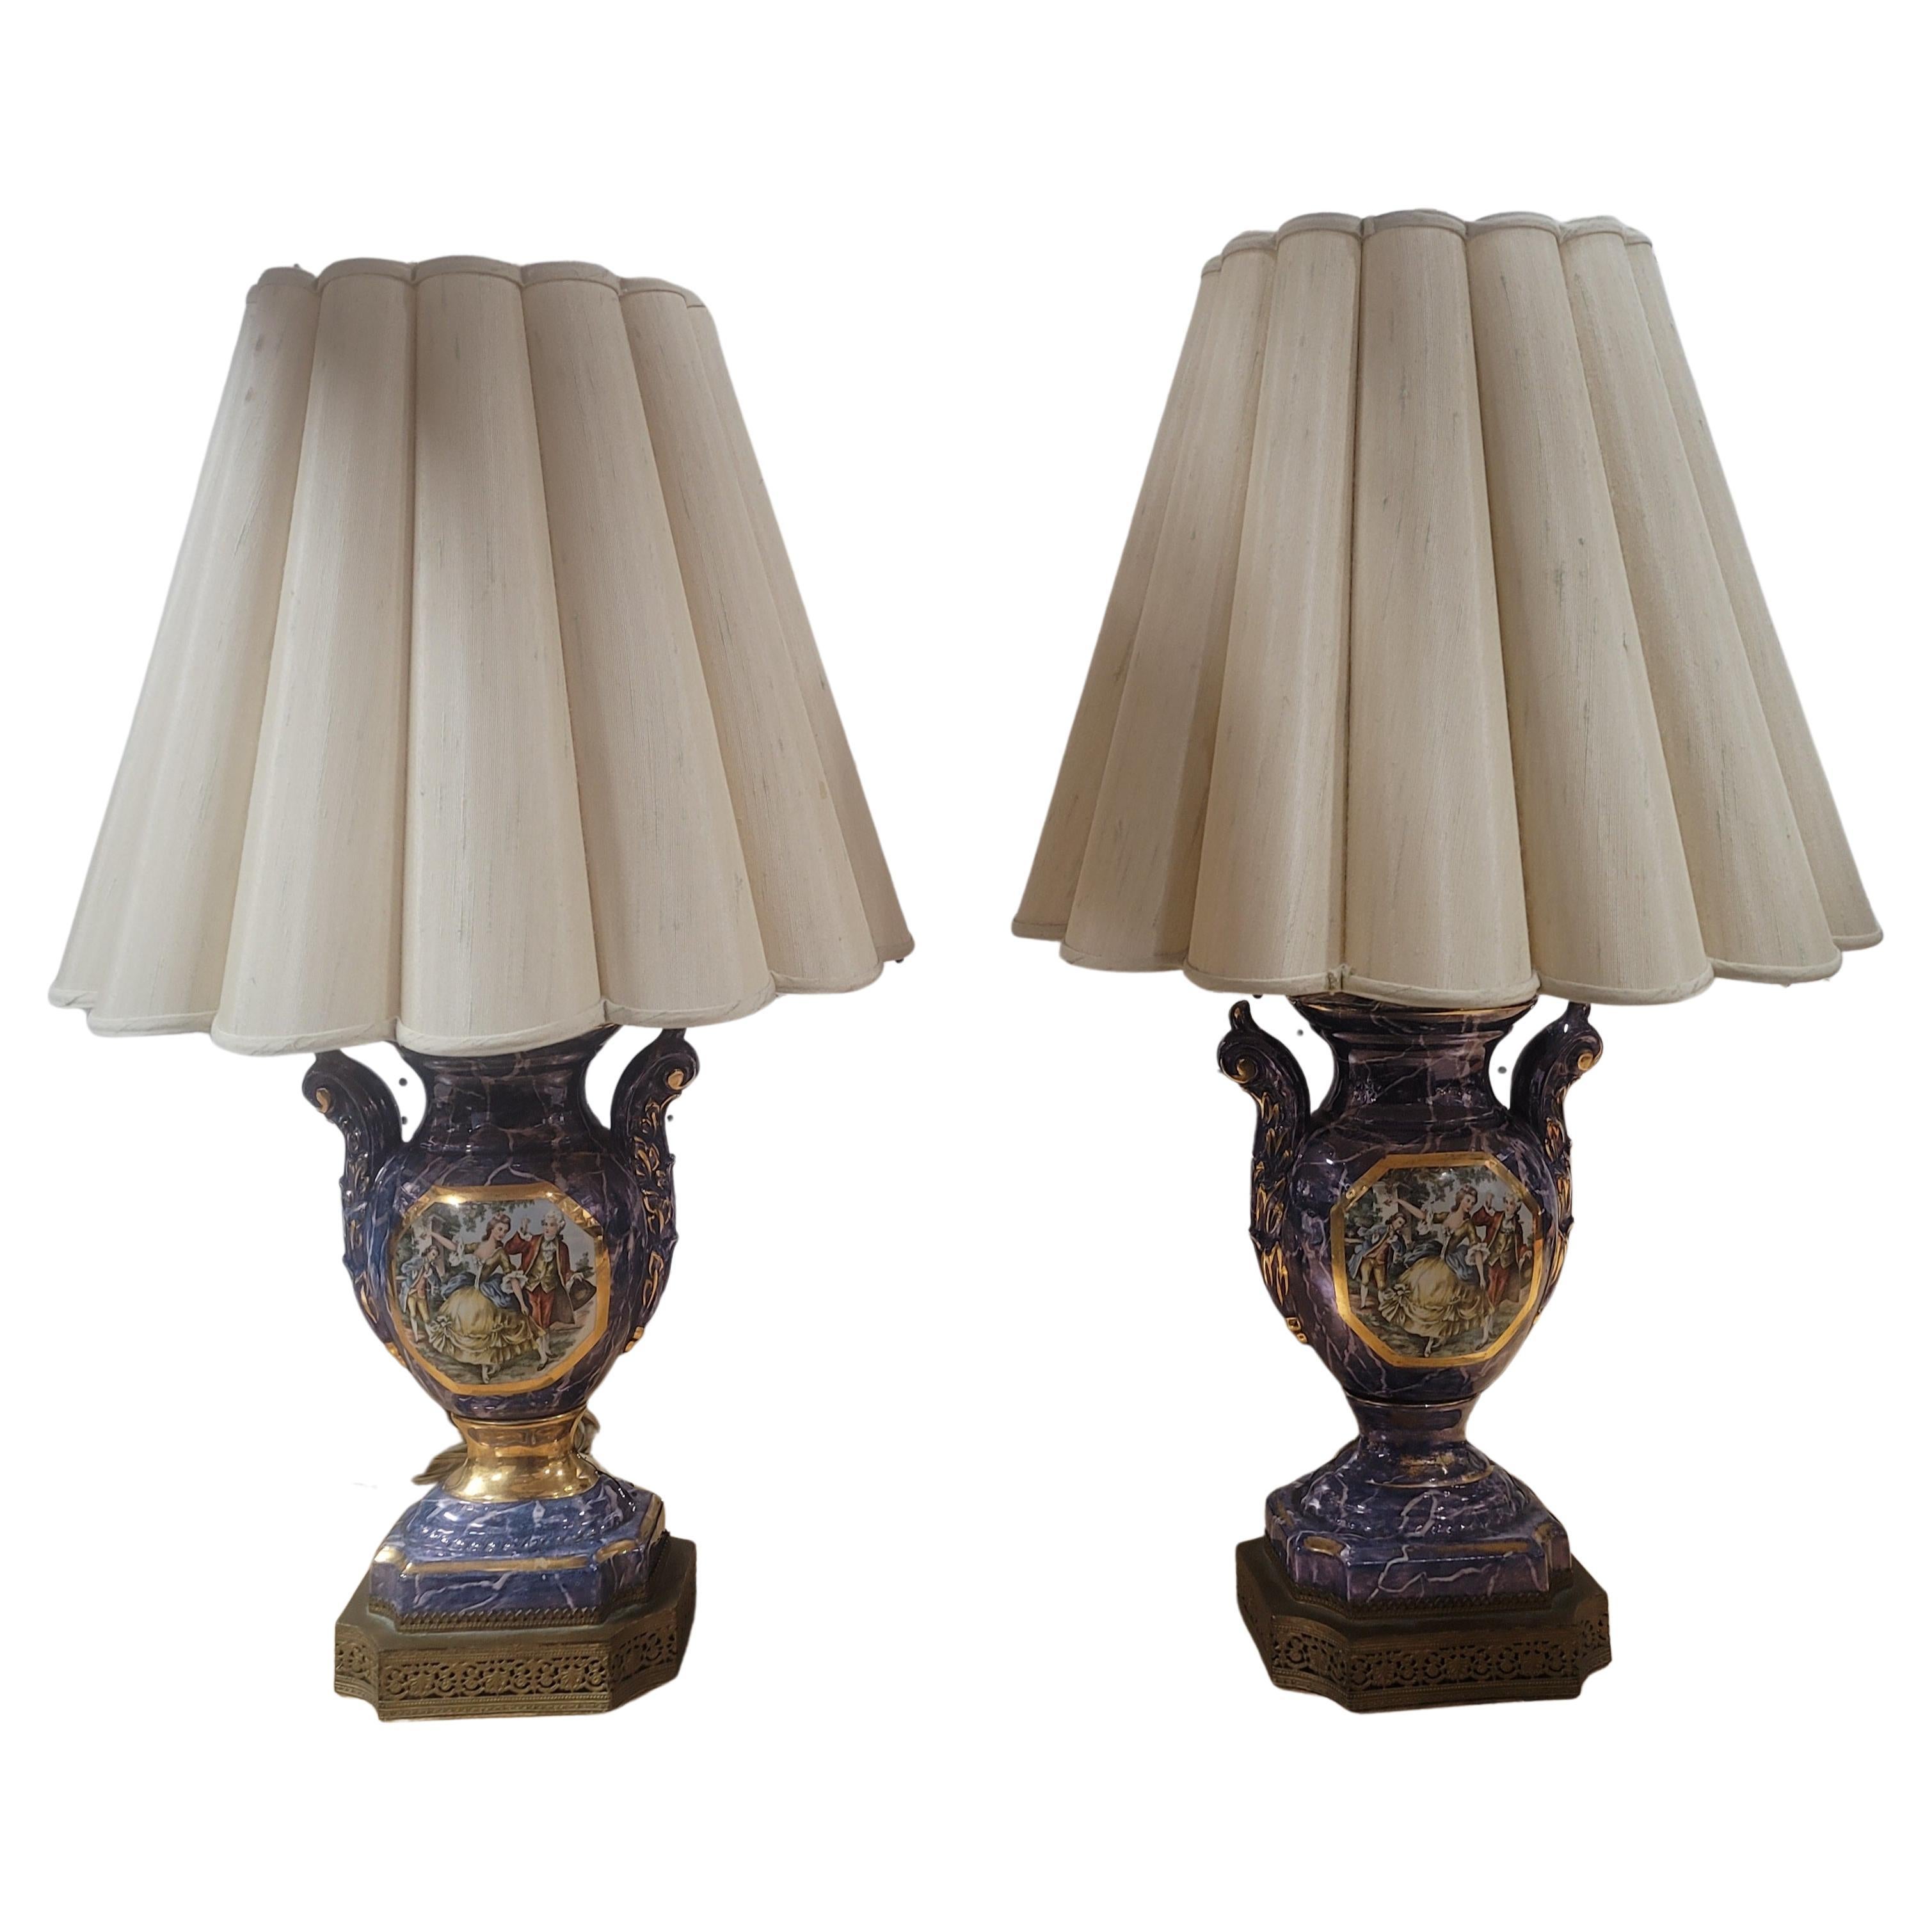 An elegant pair of French 19th century Louis XVI Sèvres Style porcelain lamps. Each lamp is raised by a mottled base decorated with fine decorated brass wrap. Above the socle shaped pedestals, the urn shaped bodies are decorated with beautiful